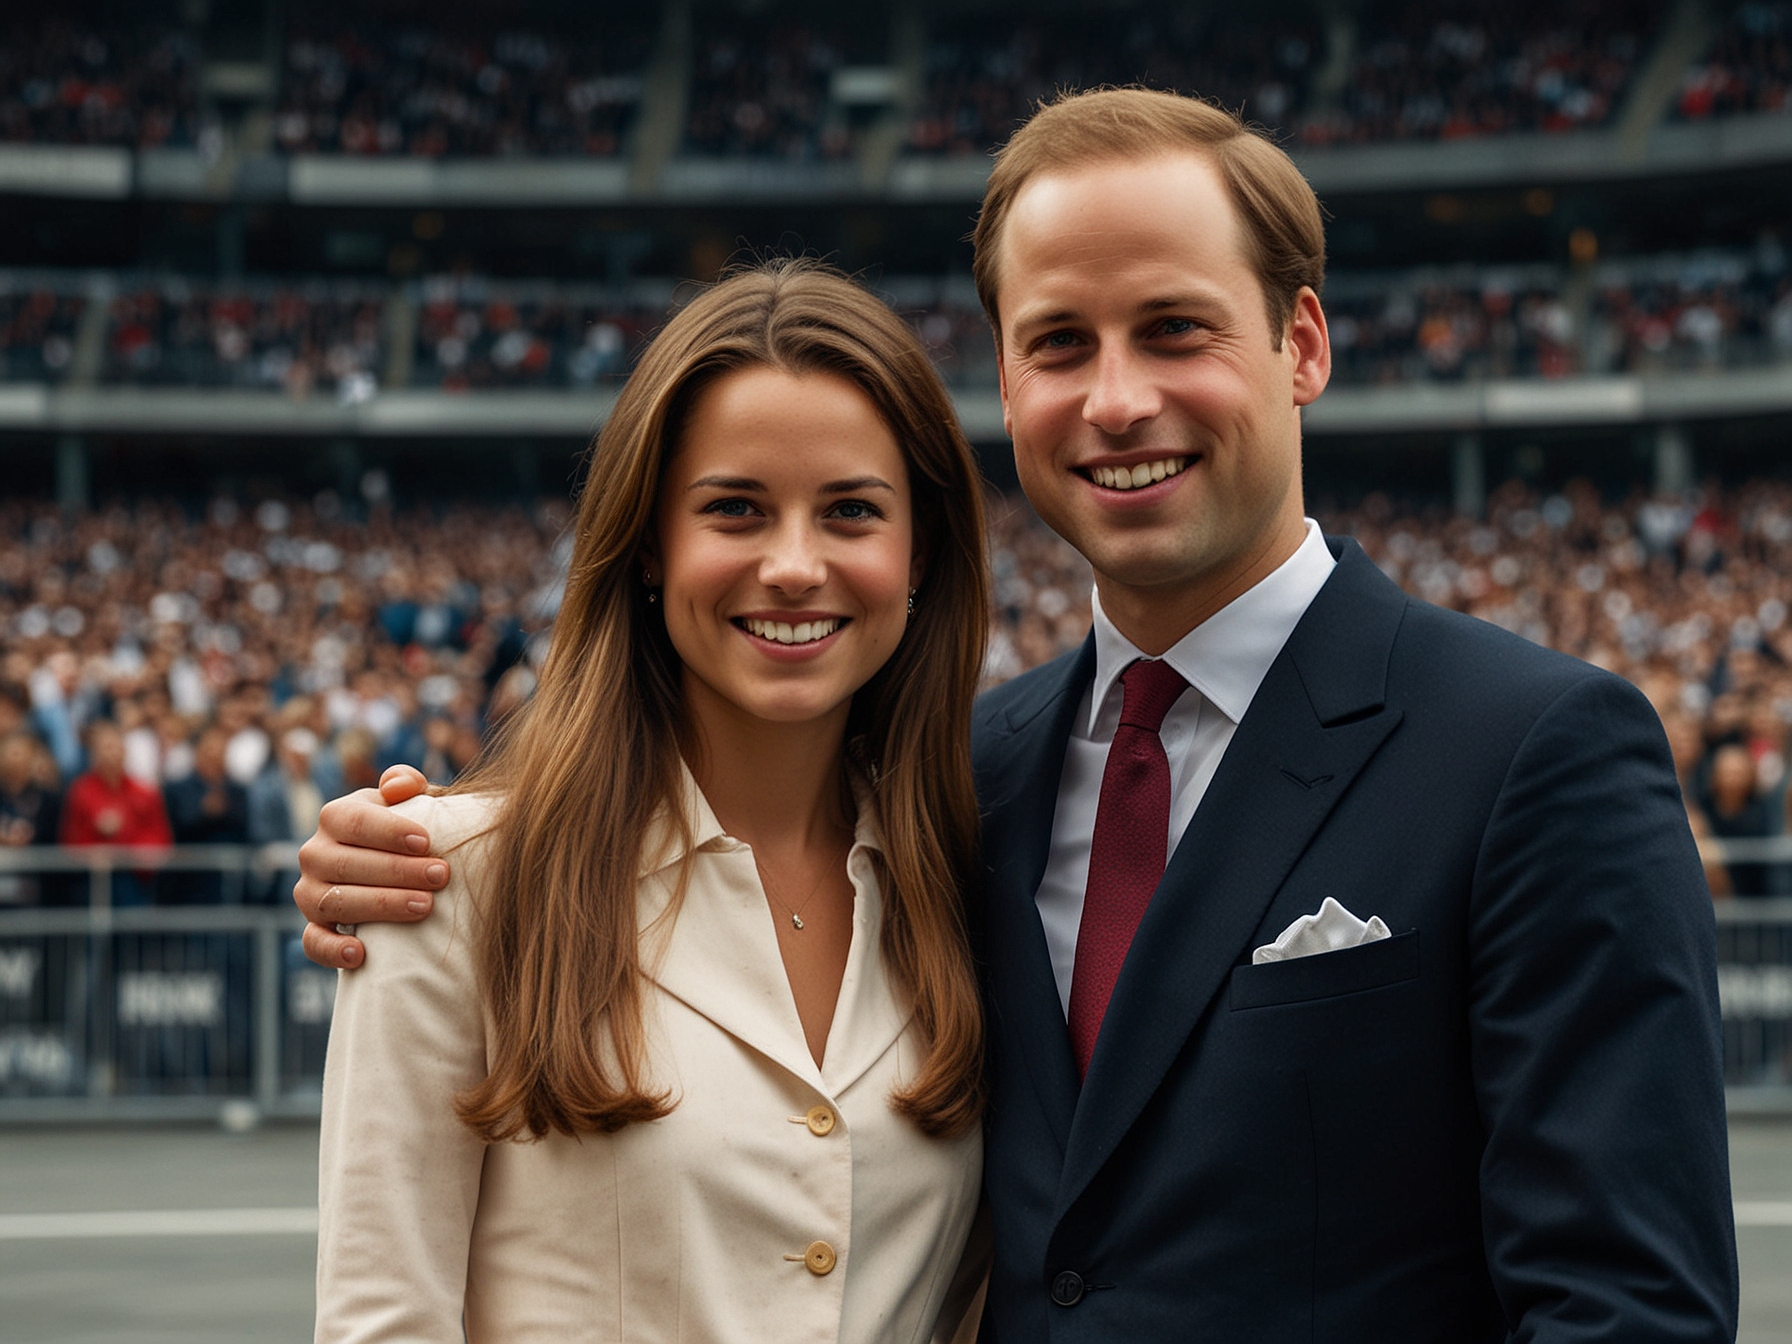 Prince William, Princess Josephine with her radiant smile, and King Frederik posing together at Frankfurt Arena. The backdrop showcases the grandeur of the venue, adding to the photo's majestic aura.